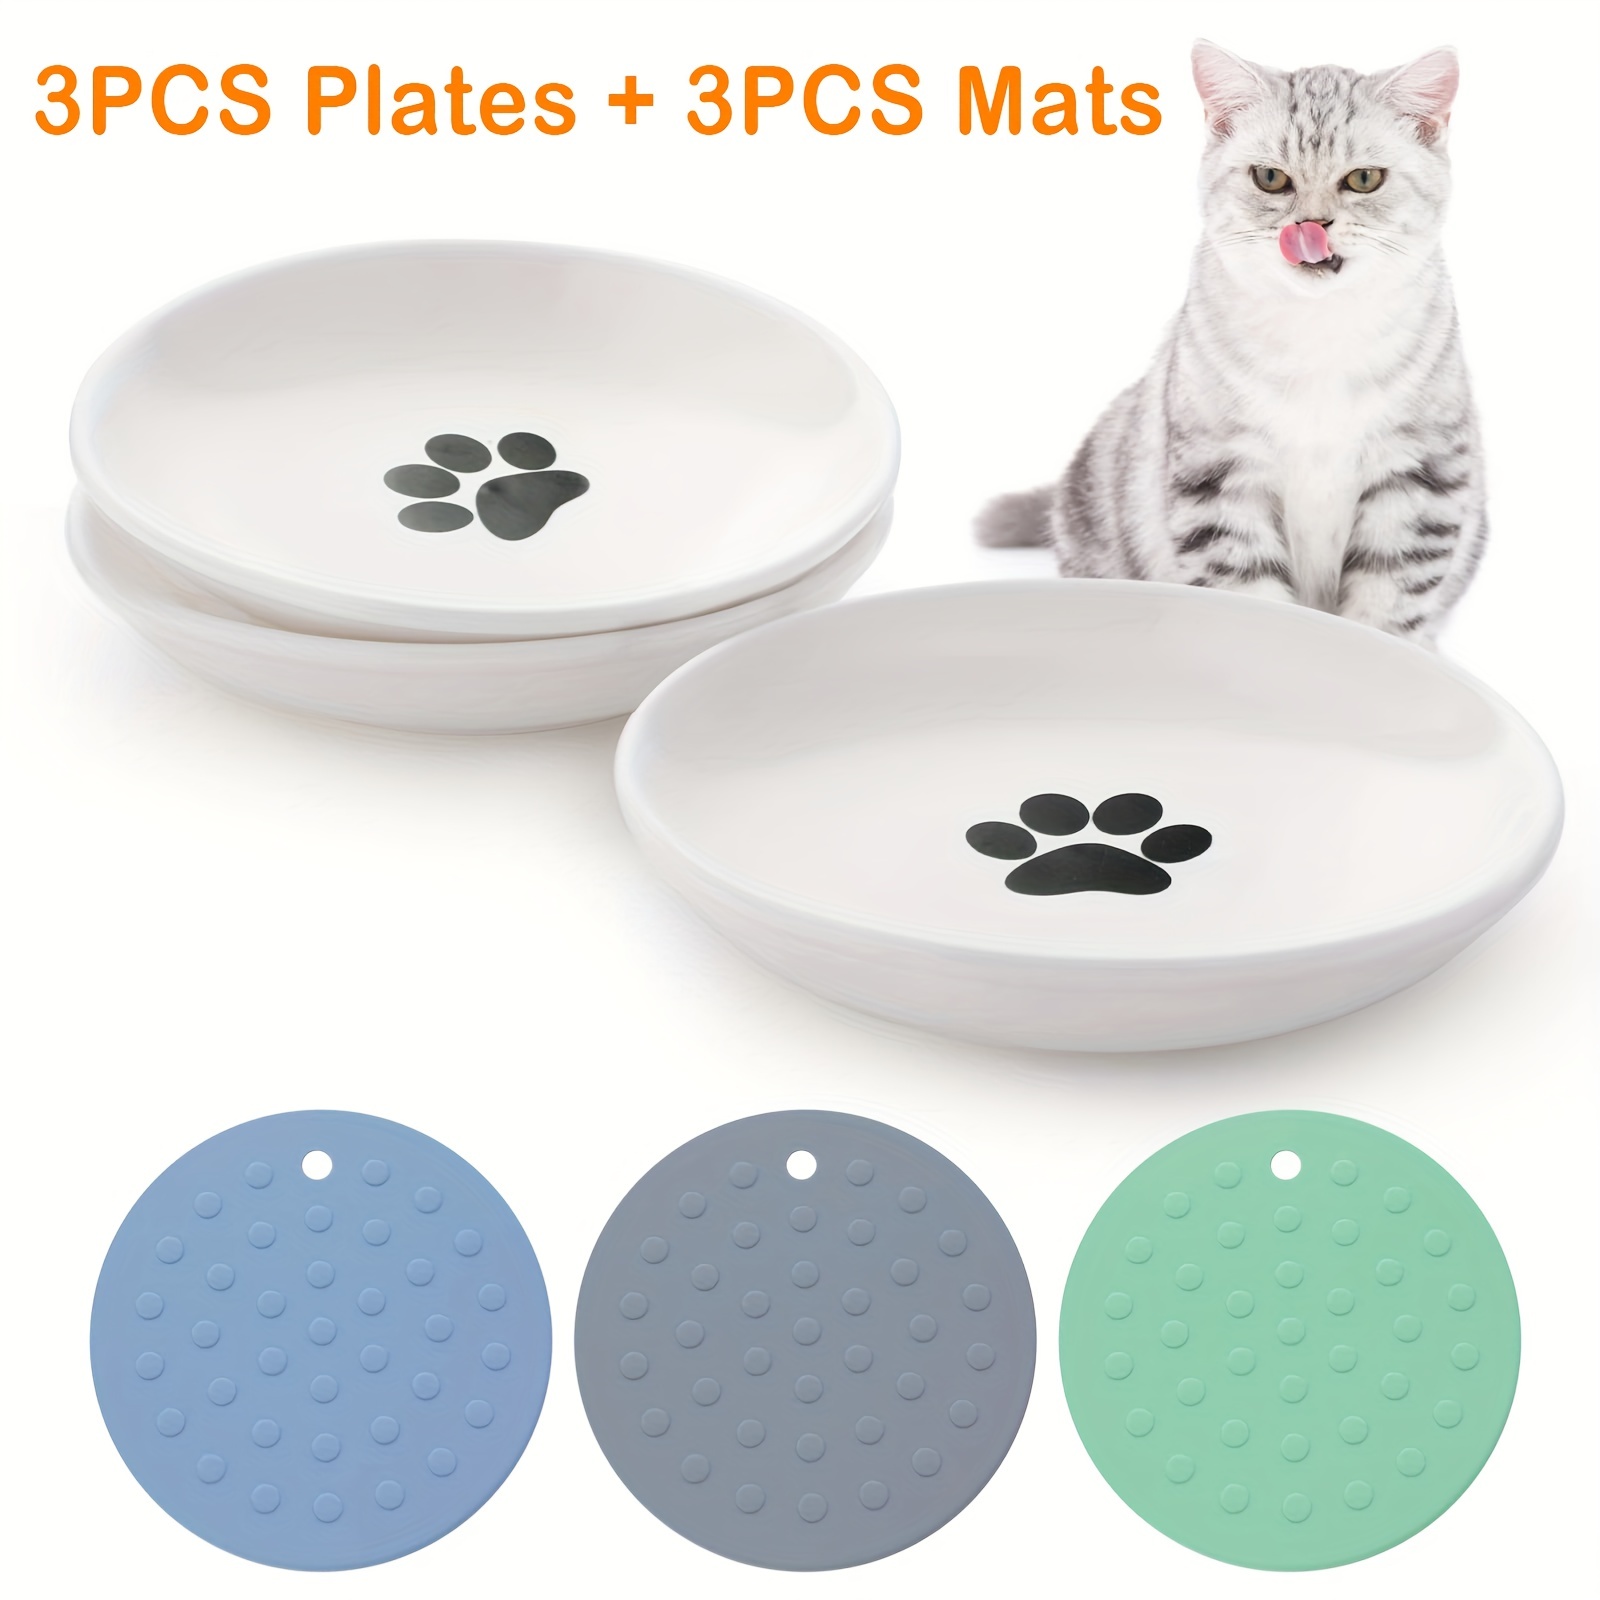 Dog Bowls, Cat Food and Water Bowls Stainless Steel, Double Pet Feeder Bowls  with No Spill Non-Skid Silicone Mat, Dog Dishes for Small Medium Dogs Cats  Puppies, Set of 2 Bowls S-6oz,Bone